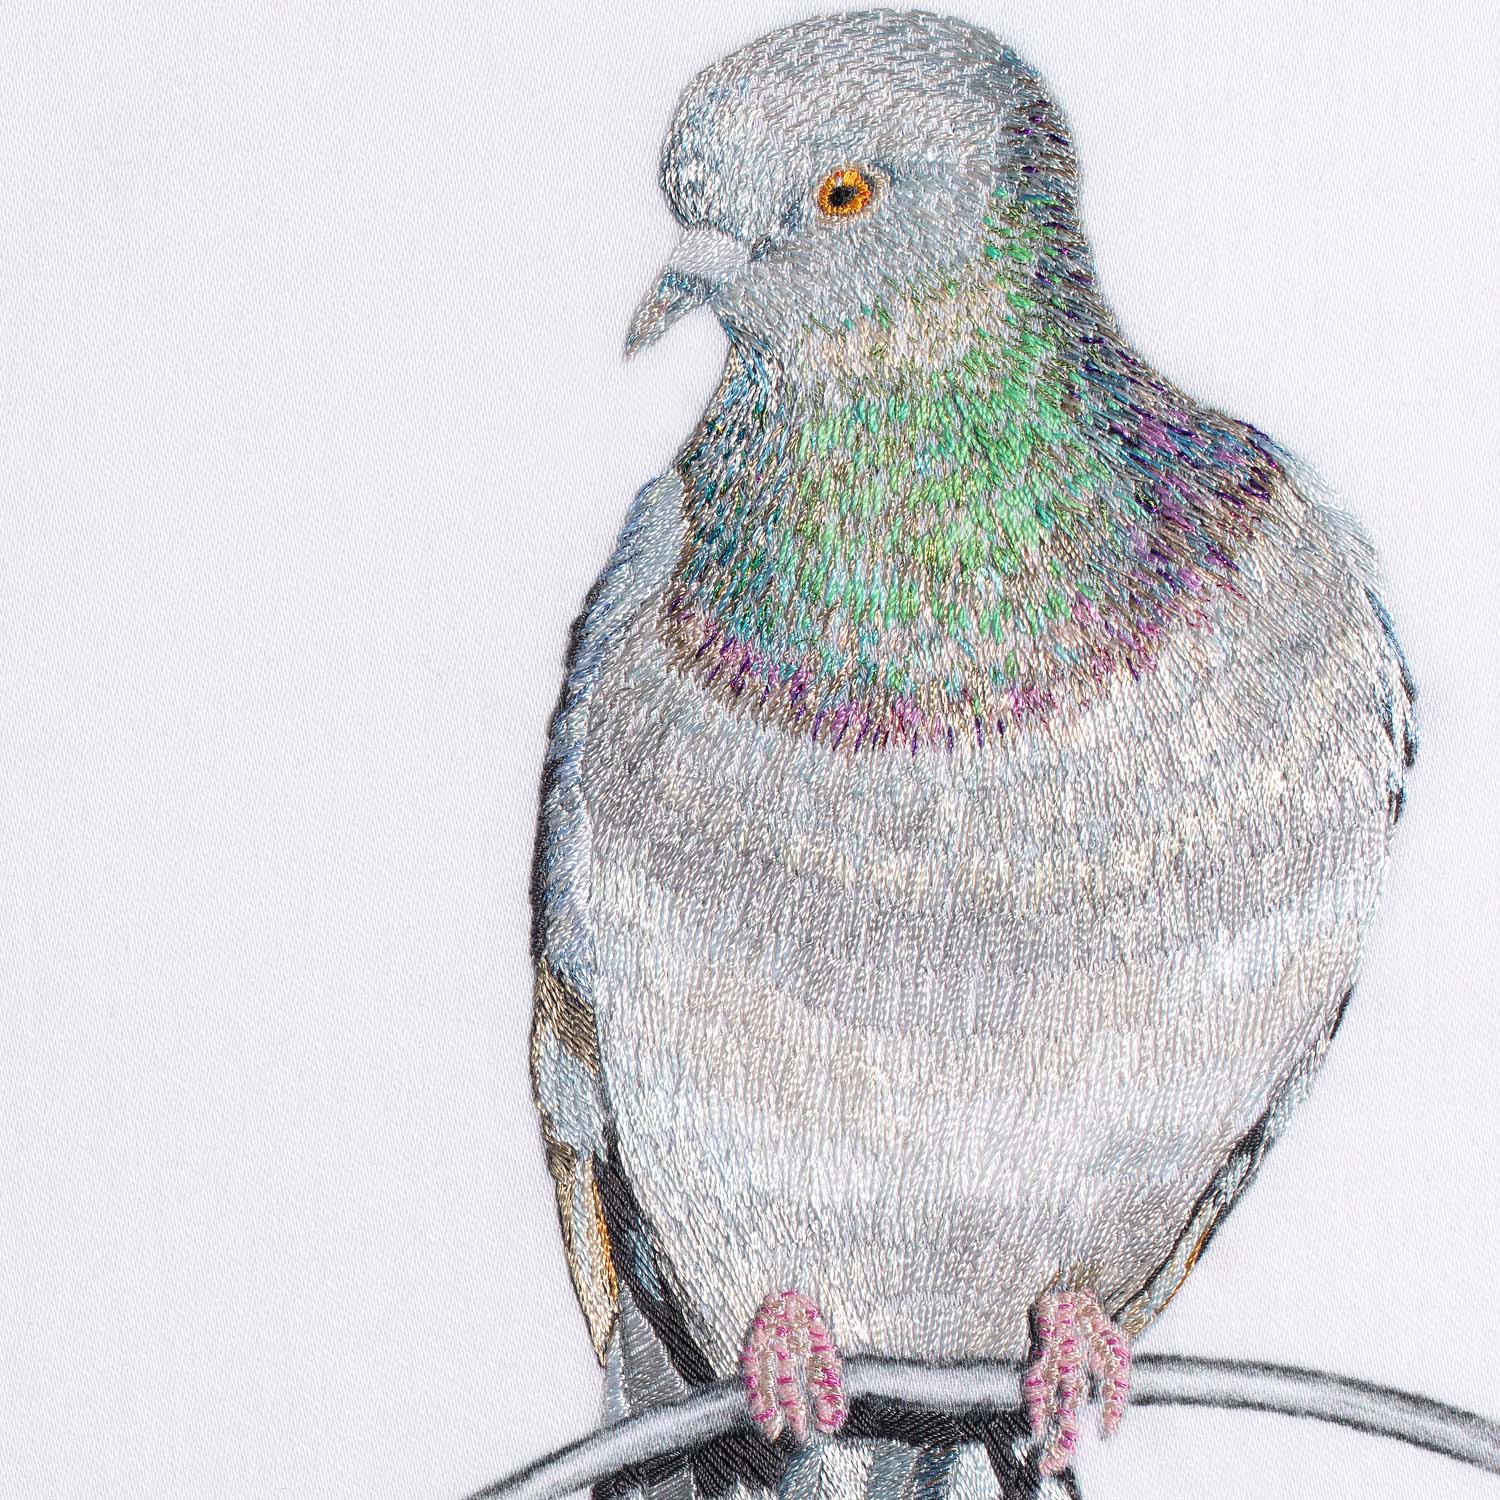 Pigeon hand embroidered artwork